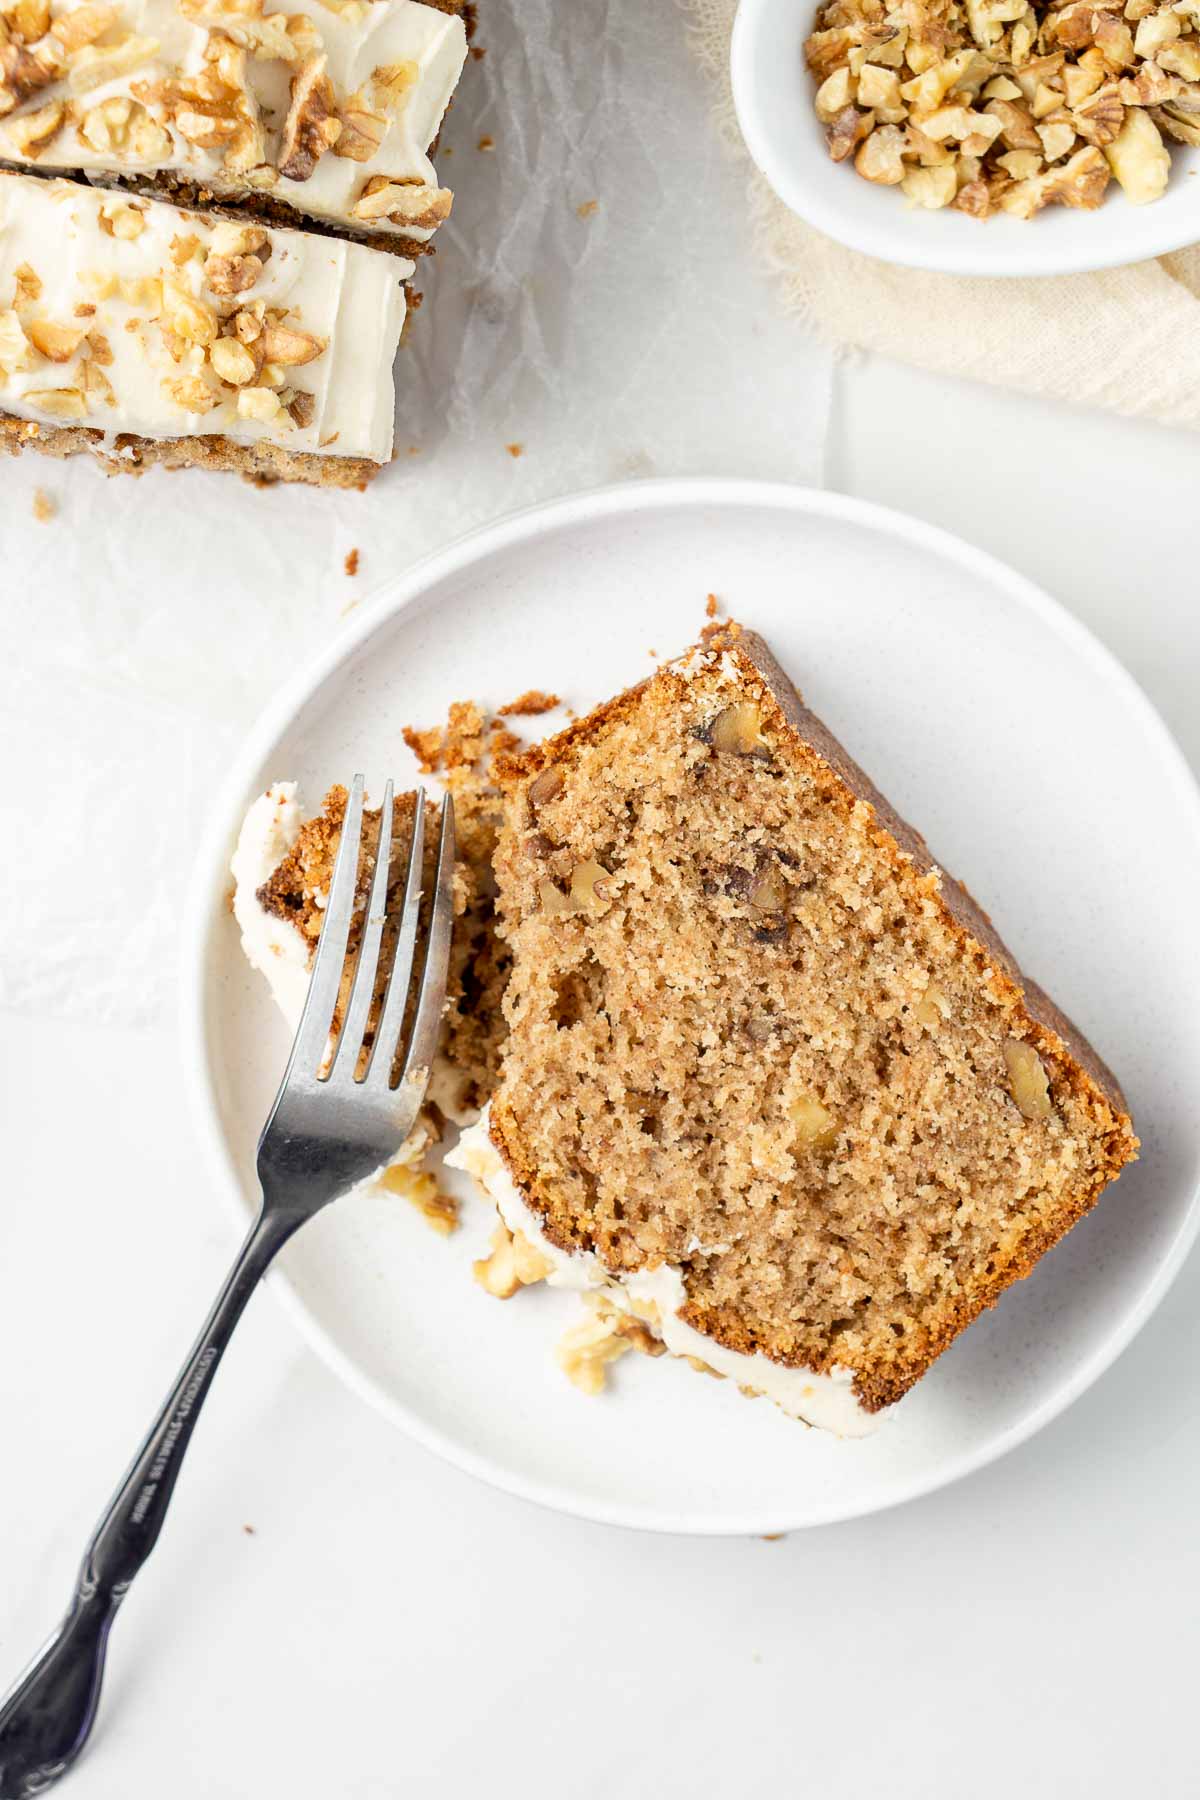 Slice of coffee walnut cake on a white plate with a fork.